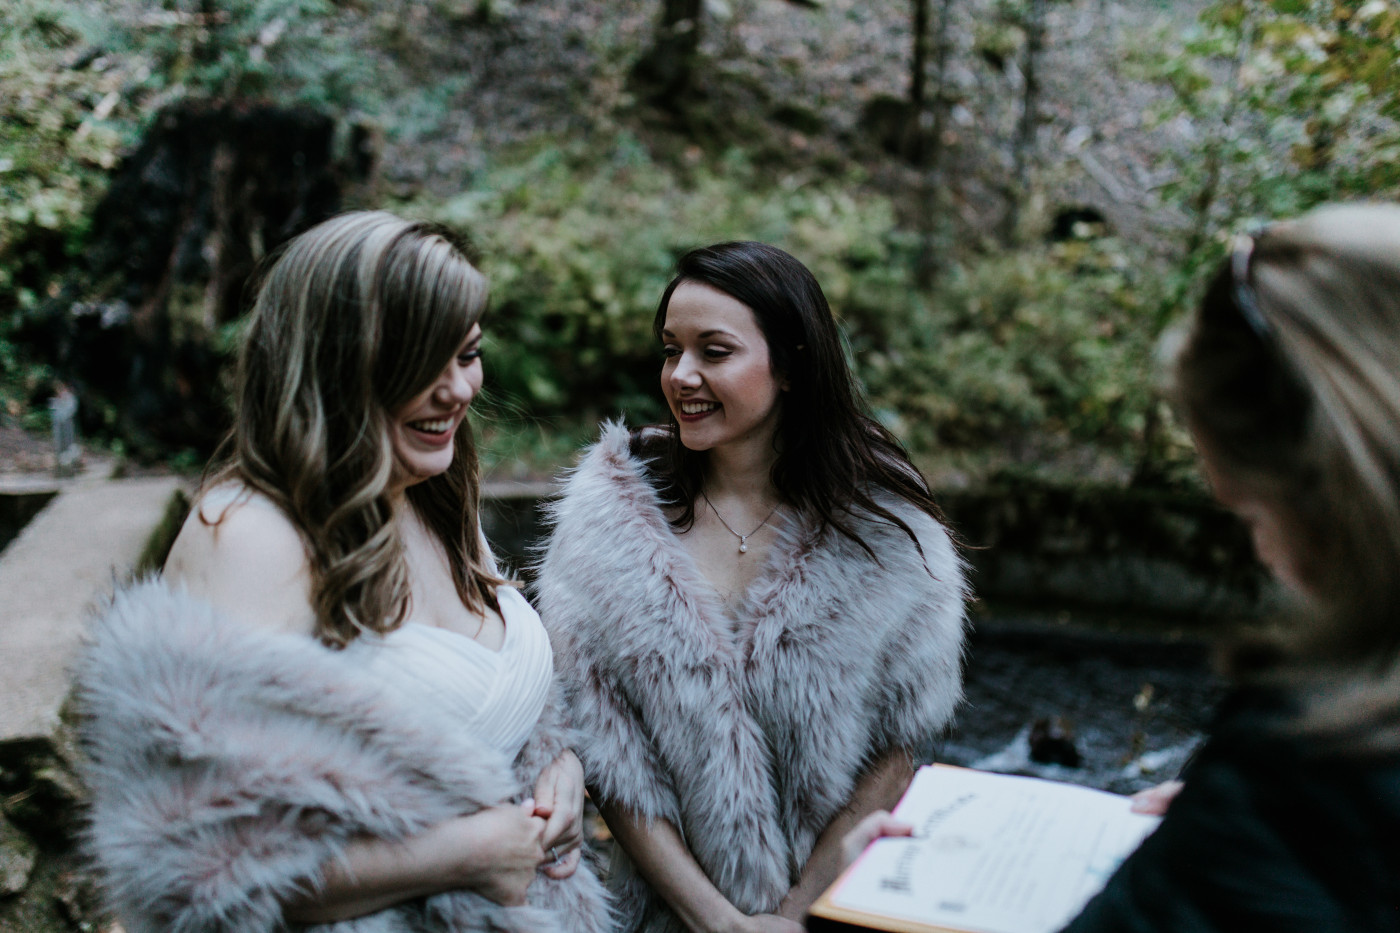 Hayley and Tiffany get ready to sign their marriage license. Elopement photography at the Columbia River Gorge by Sienna Plus Josh.